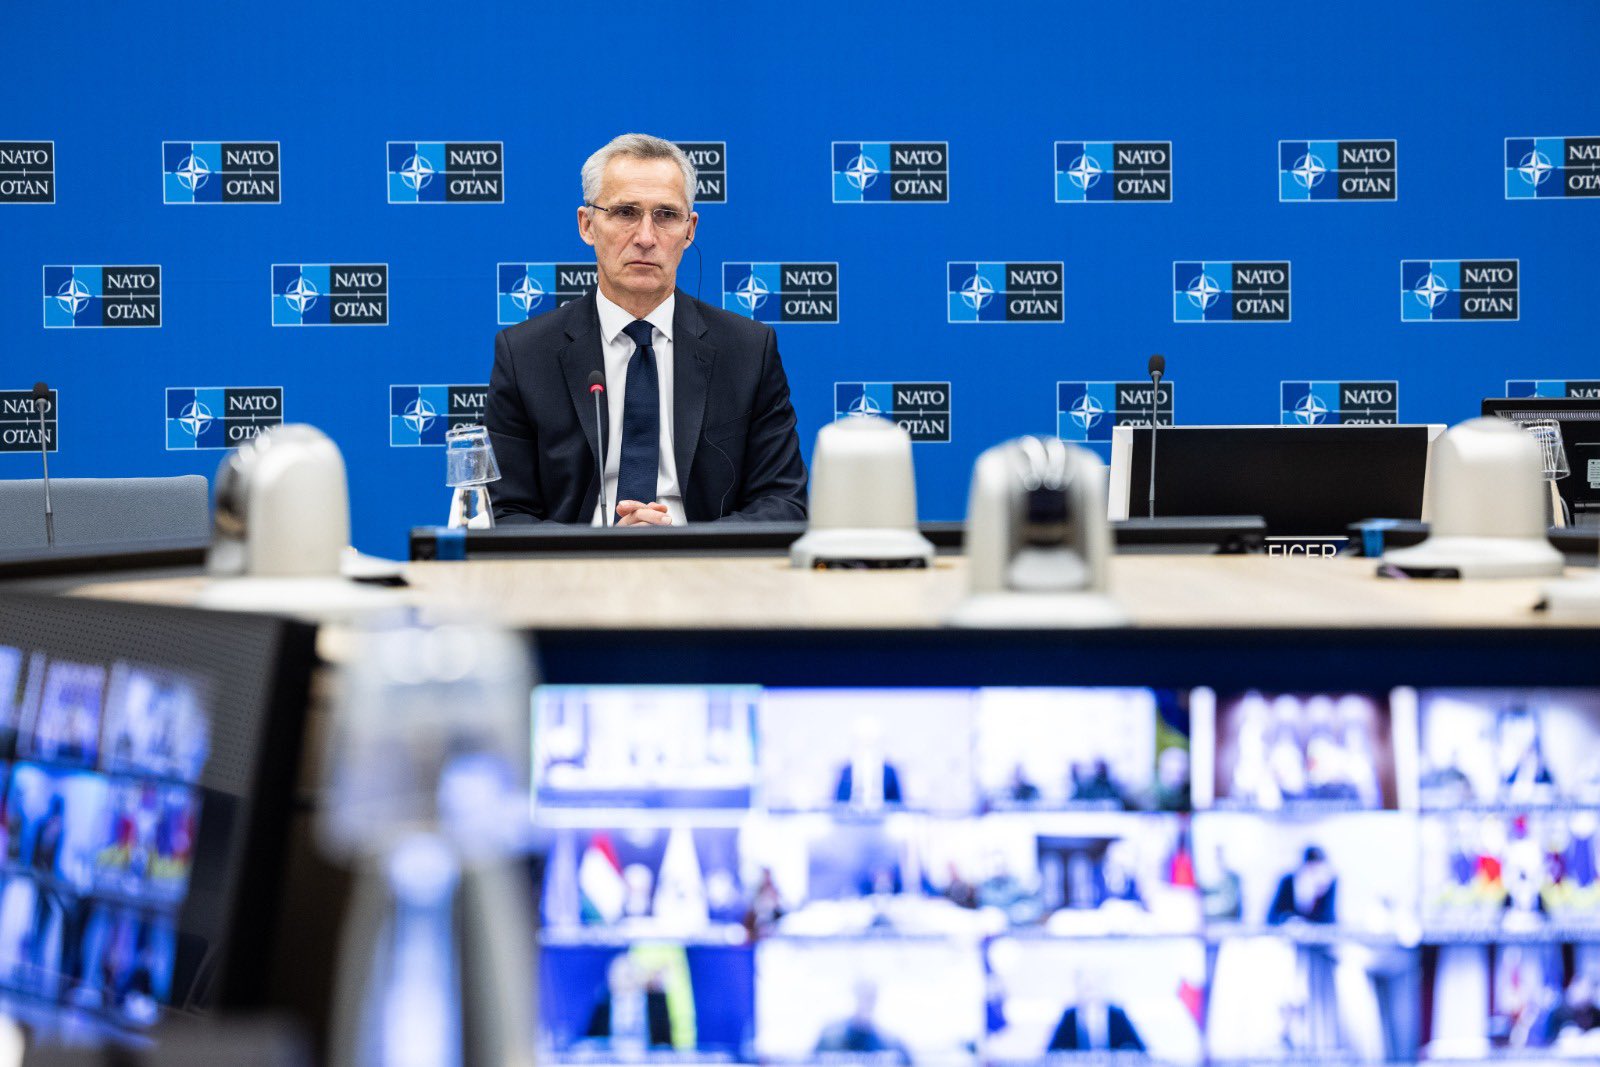 Photo: Jens Stoltenberg at a meeting of the Ukraine Defense Contact Group, following the explosion in Poland. Credit: @jensstoltenberg via Twitter. https://twitter.com/jensstoltenberg/status/1592892468978421760/photo/1